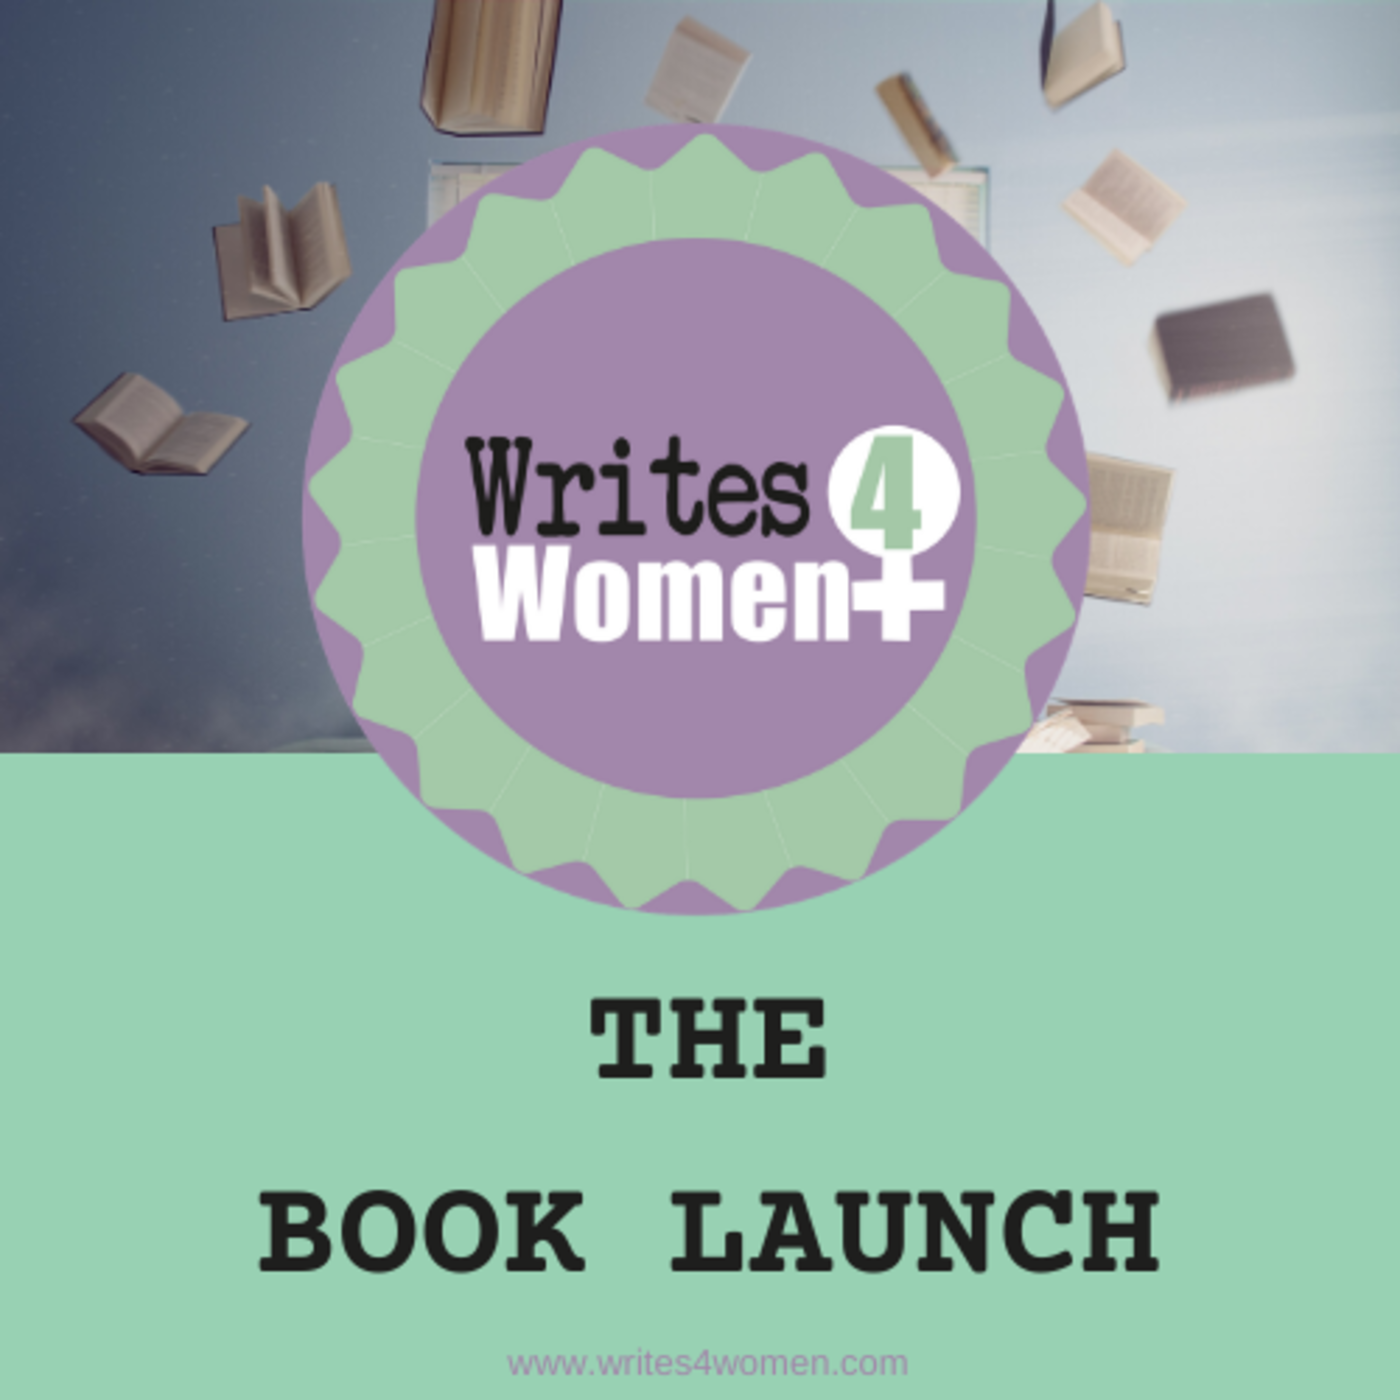 W4W BOOK LAUNCH - Victoria Purman "The Women's Pages"